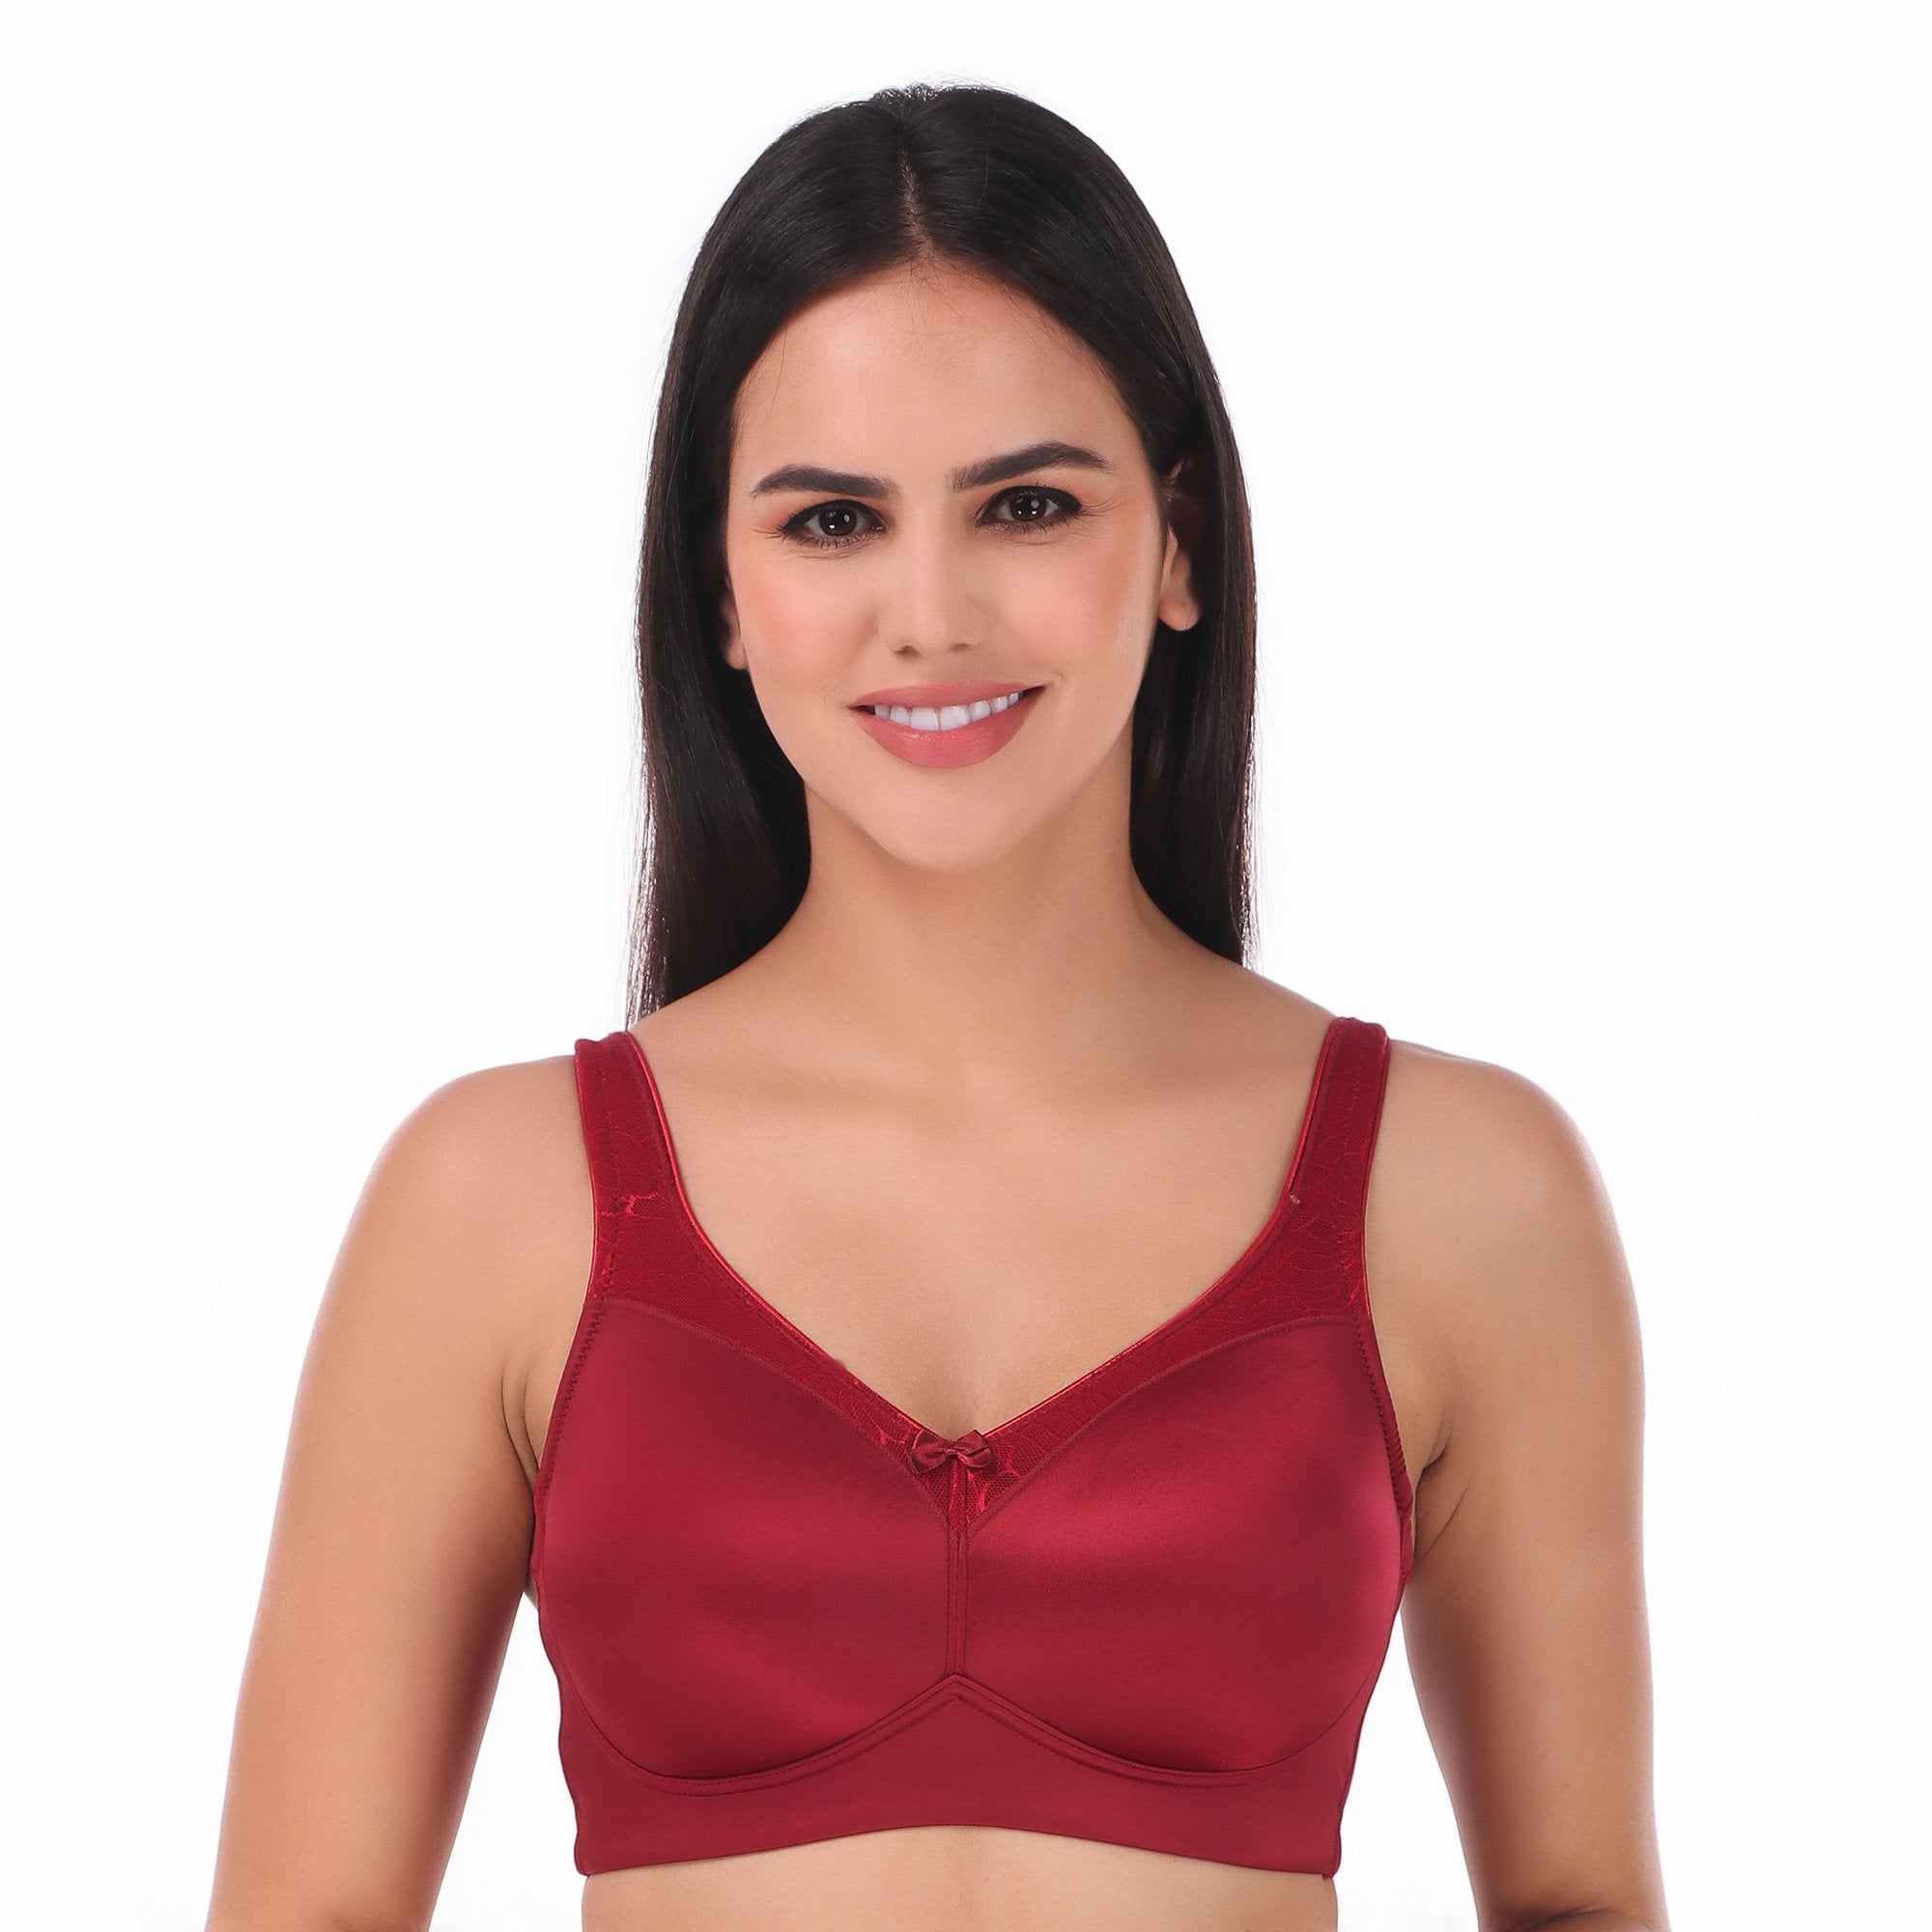 Hanes Red Flame Womens Bra in Sivakasi - Dealers, Manufacturers & Suppliers  - Justdial